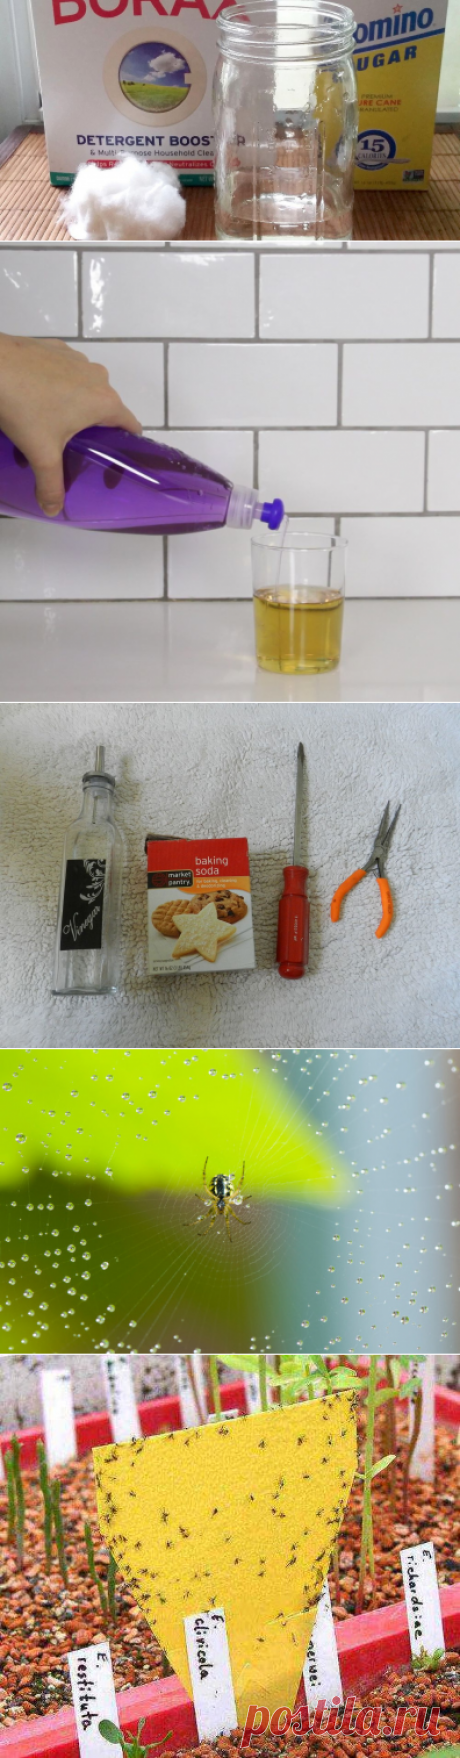 Easy DIY Remedies For Your 7 Most Hated Bugs | Hometalk